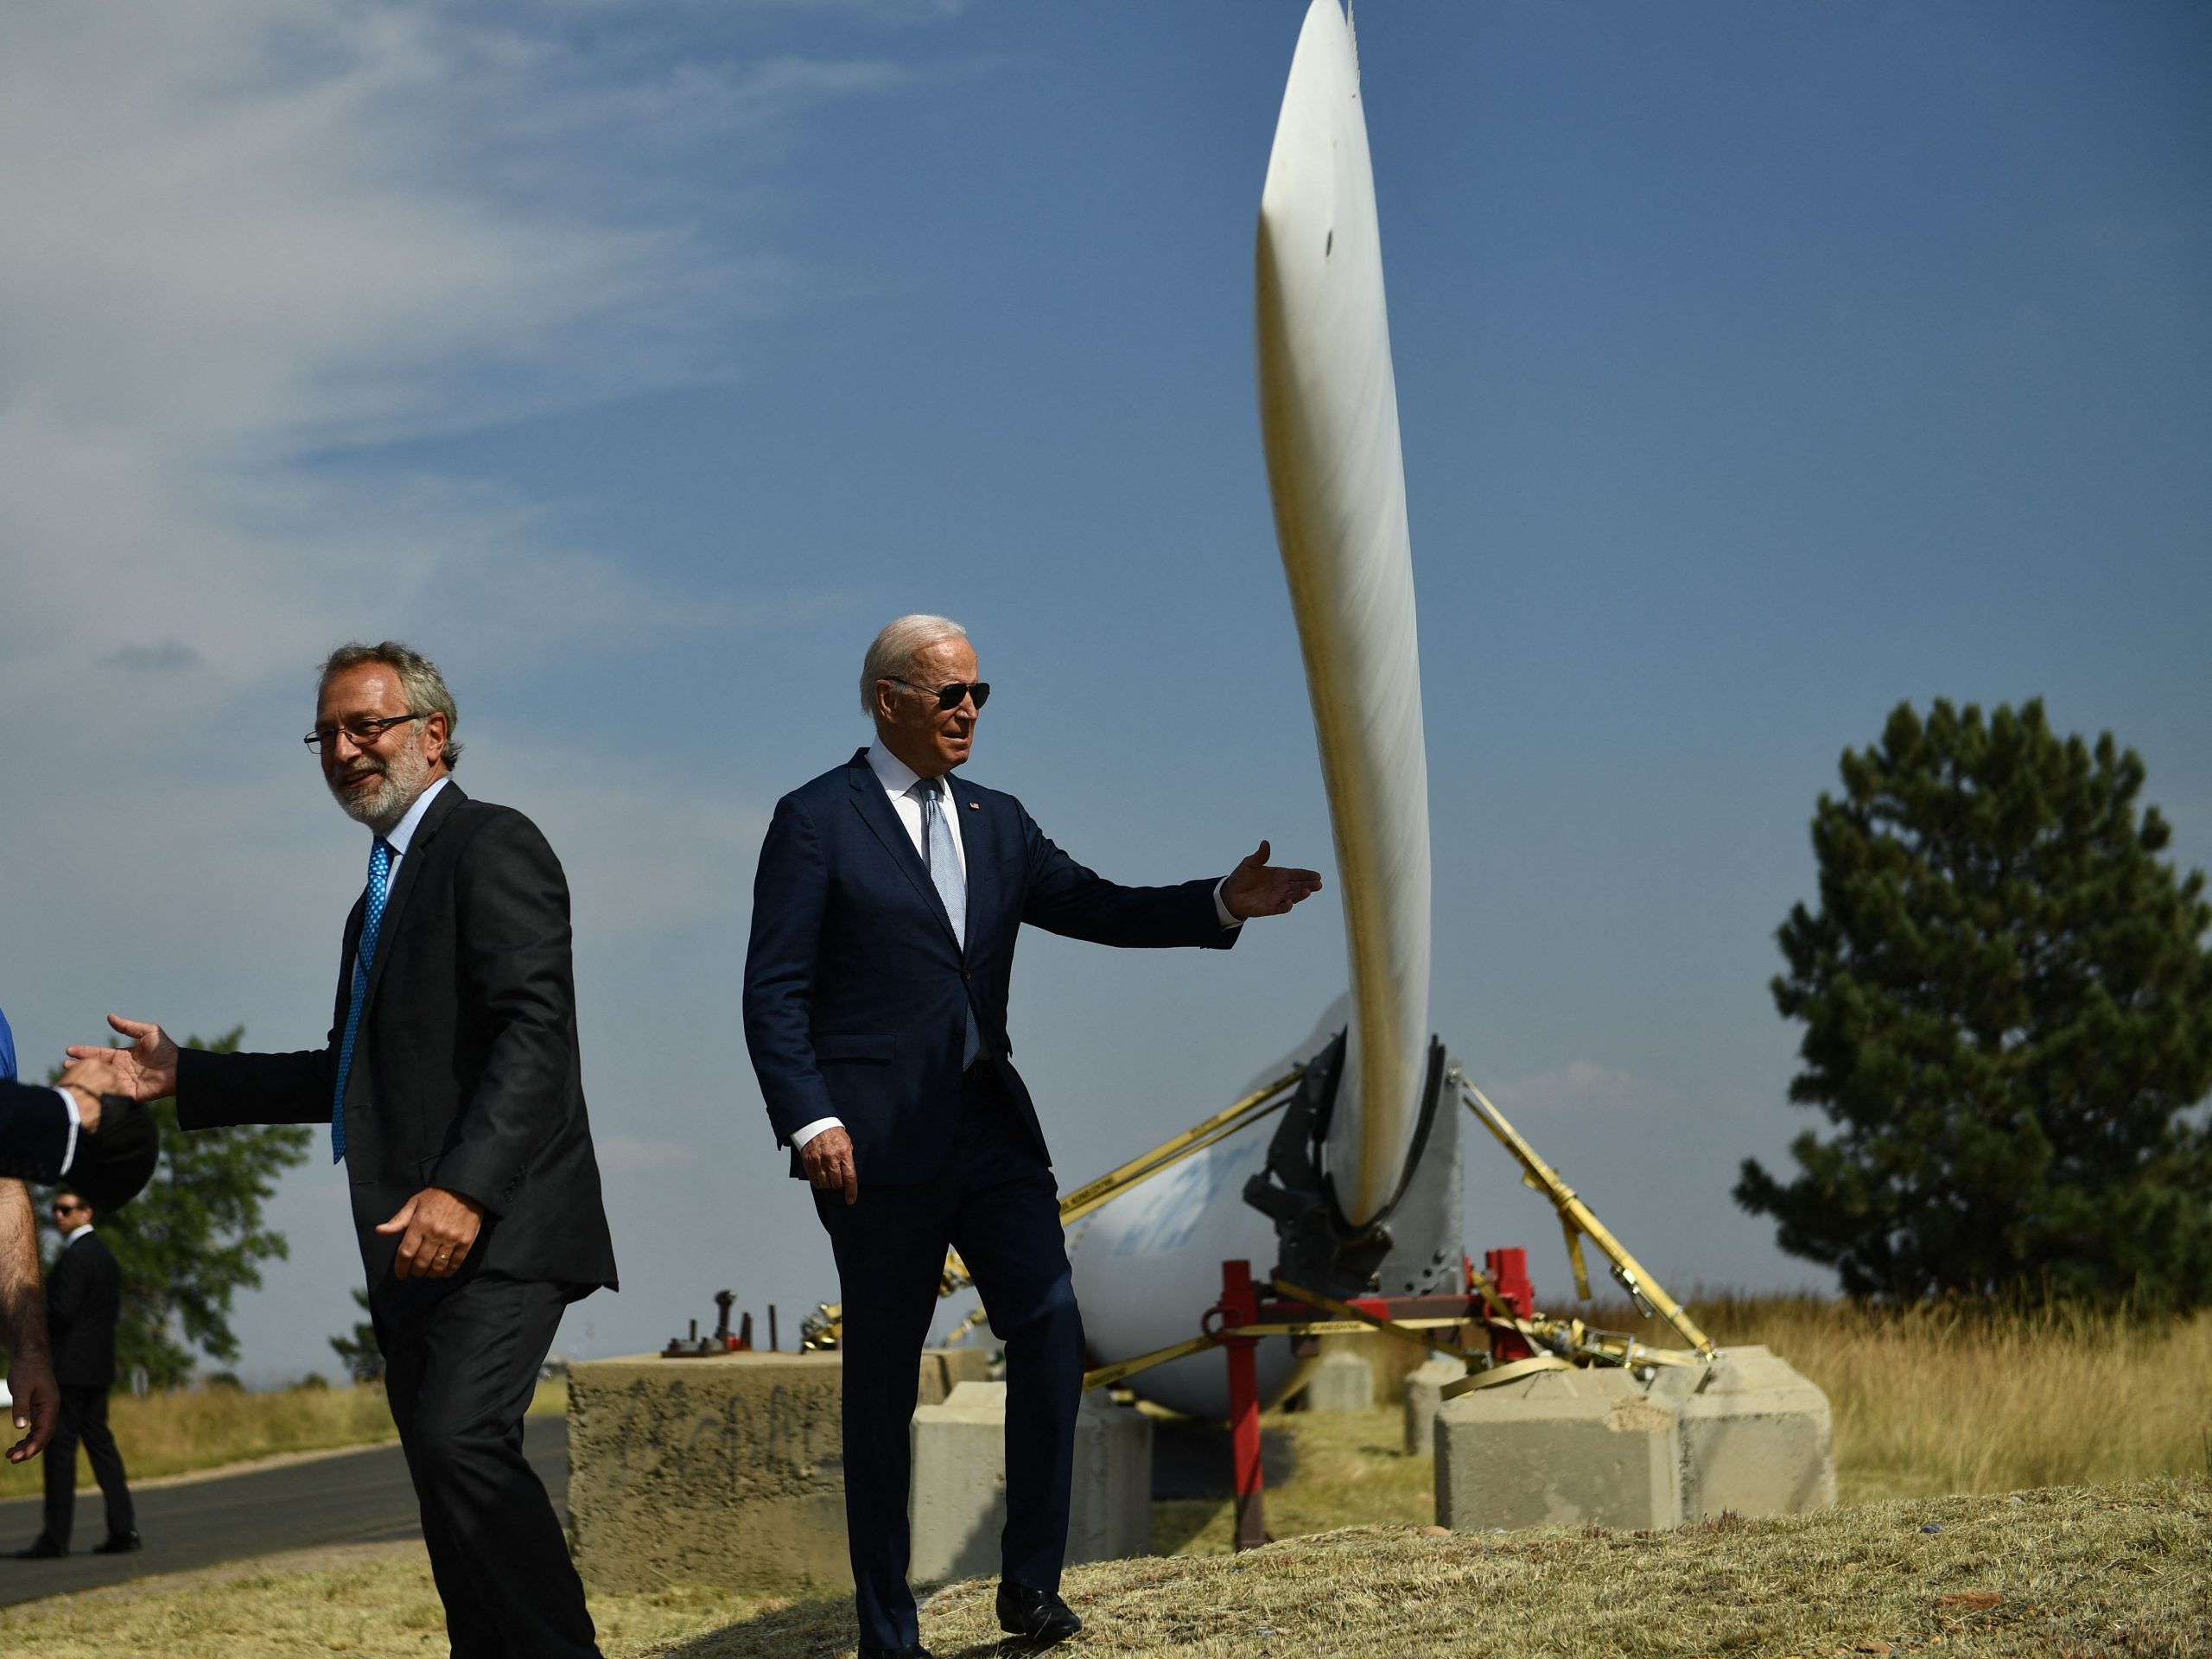 US President Joe Biden looks at a wind turbine blade as he tours the National Renewable Energy Laboratory in Arvada, Colorado, on September 14, 2021, before delivering a speech on the infrastructure deal and the Build Back Better agenda.